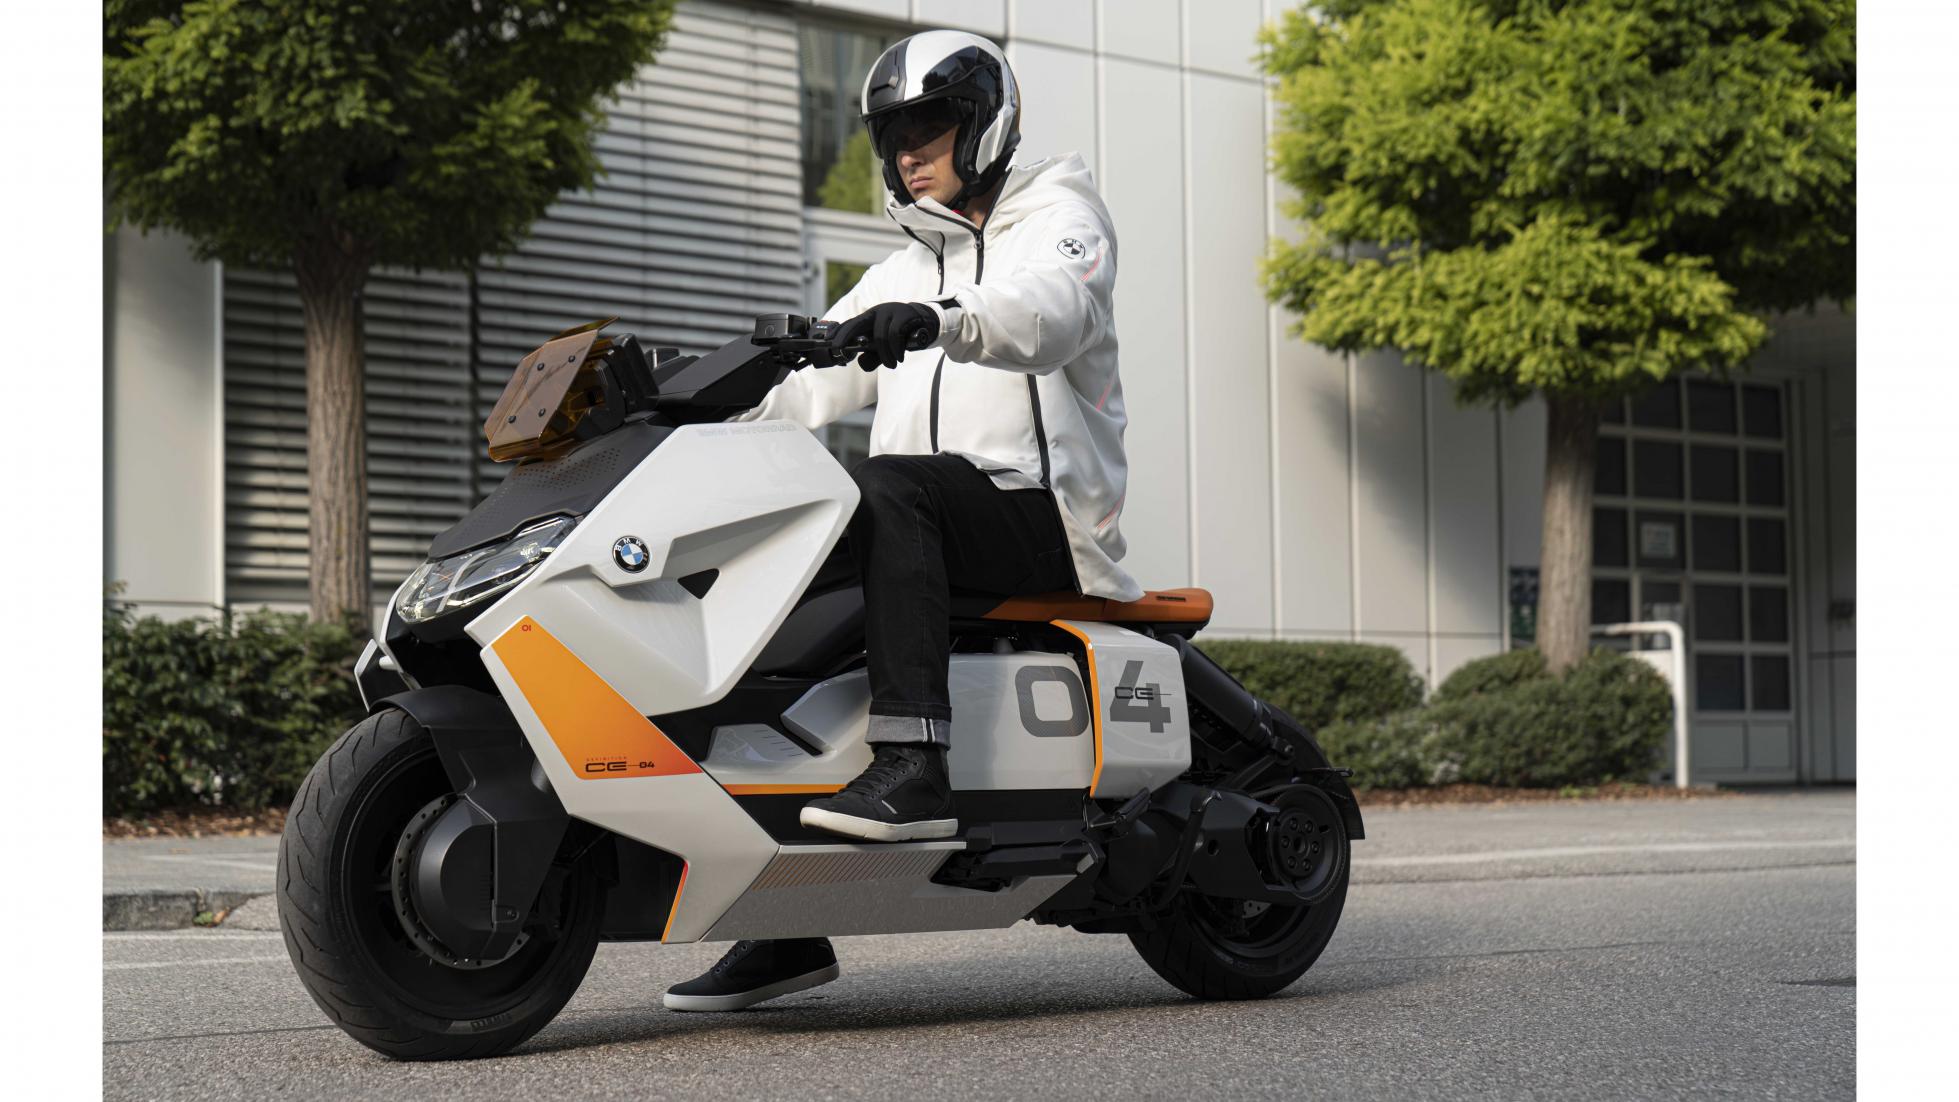 BMW reckons it's redefined the scooter segment